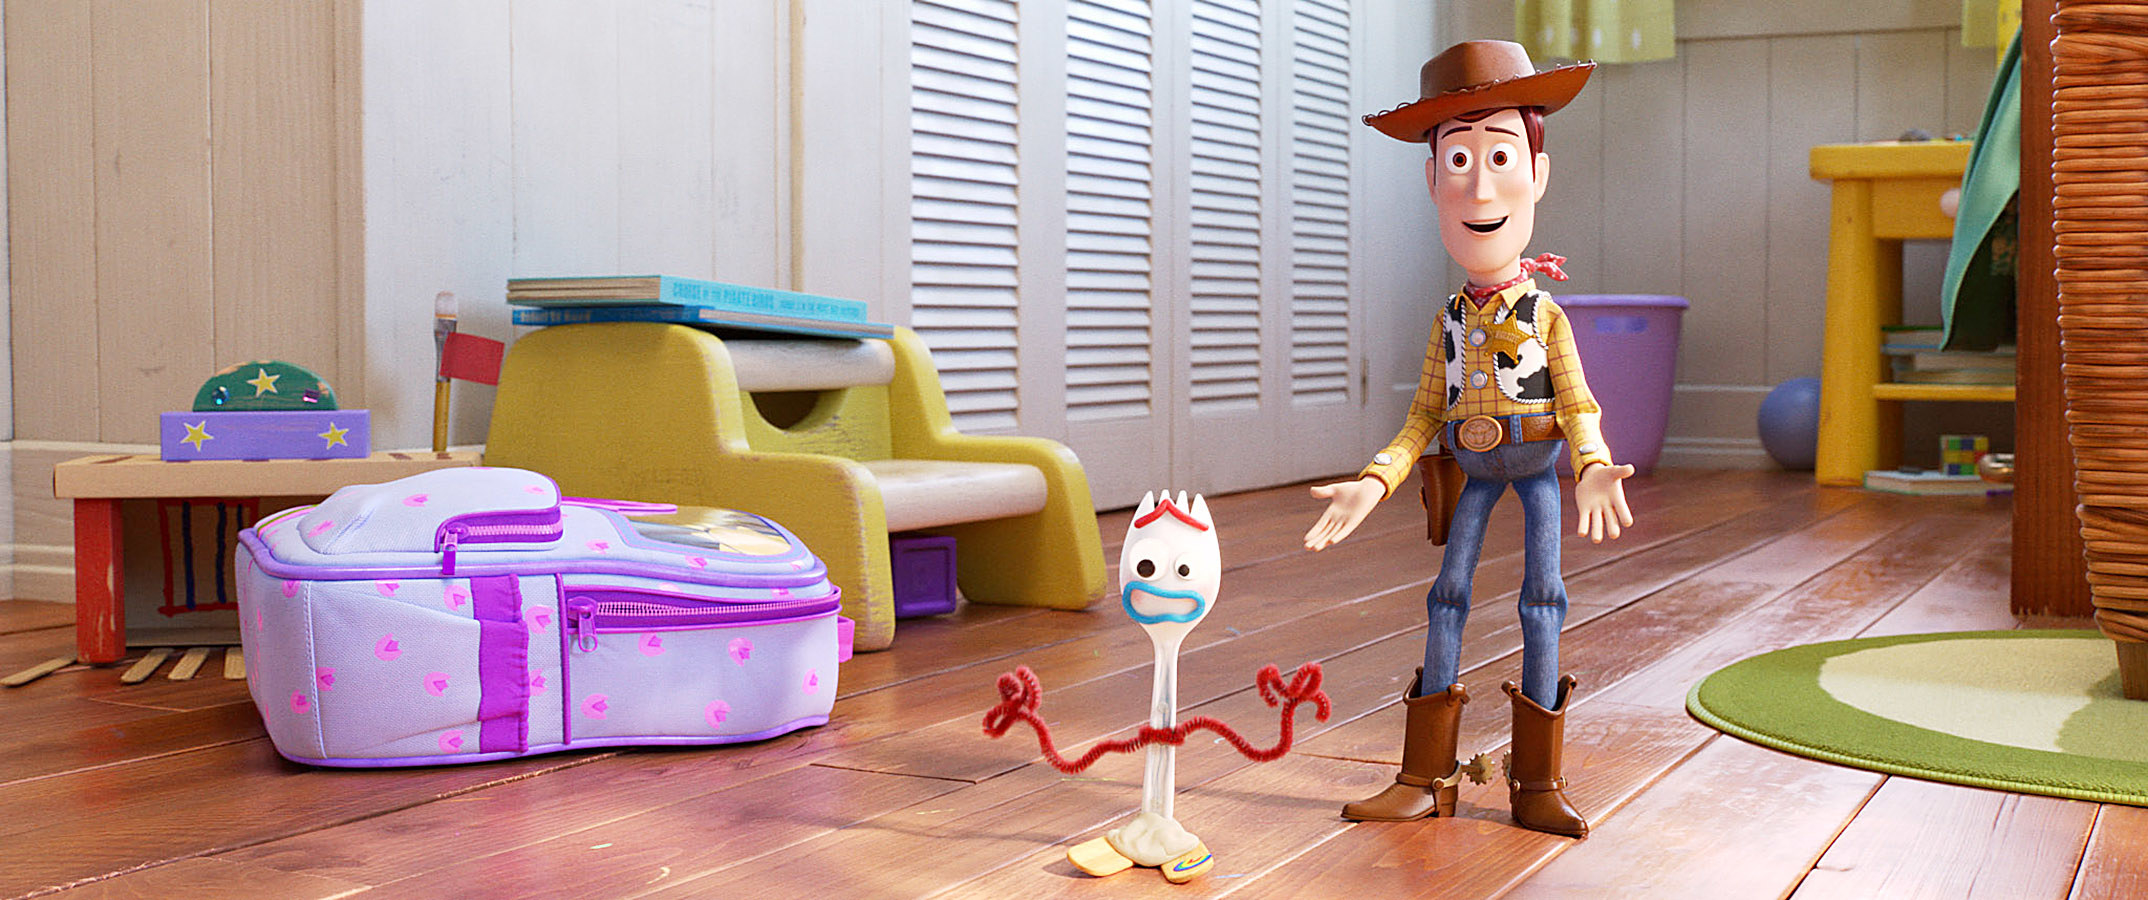 Woody and the spoon character with their arms stretched out